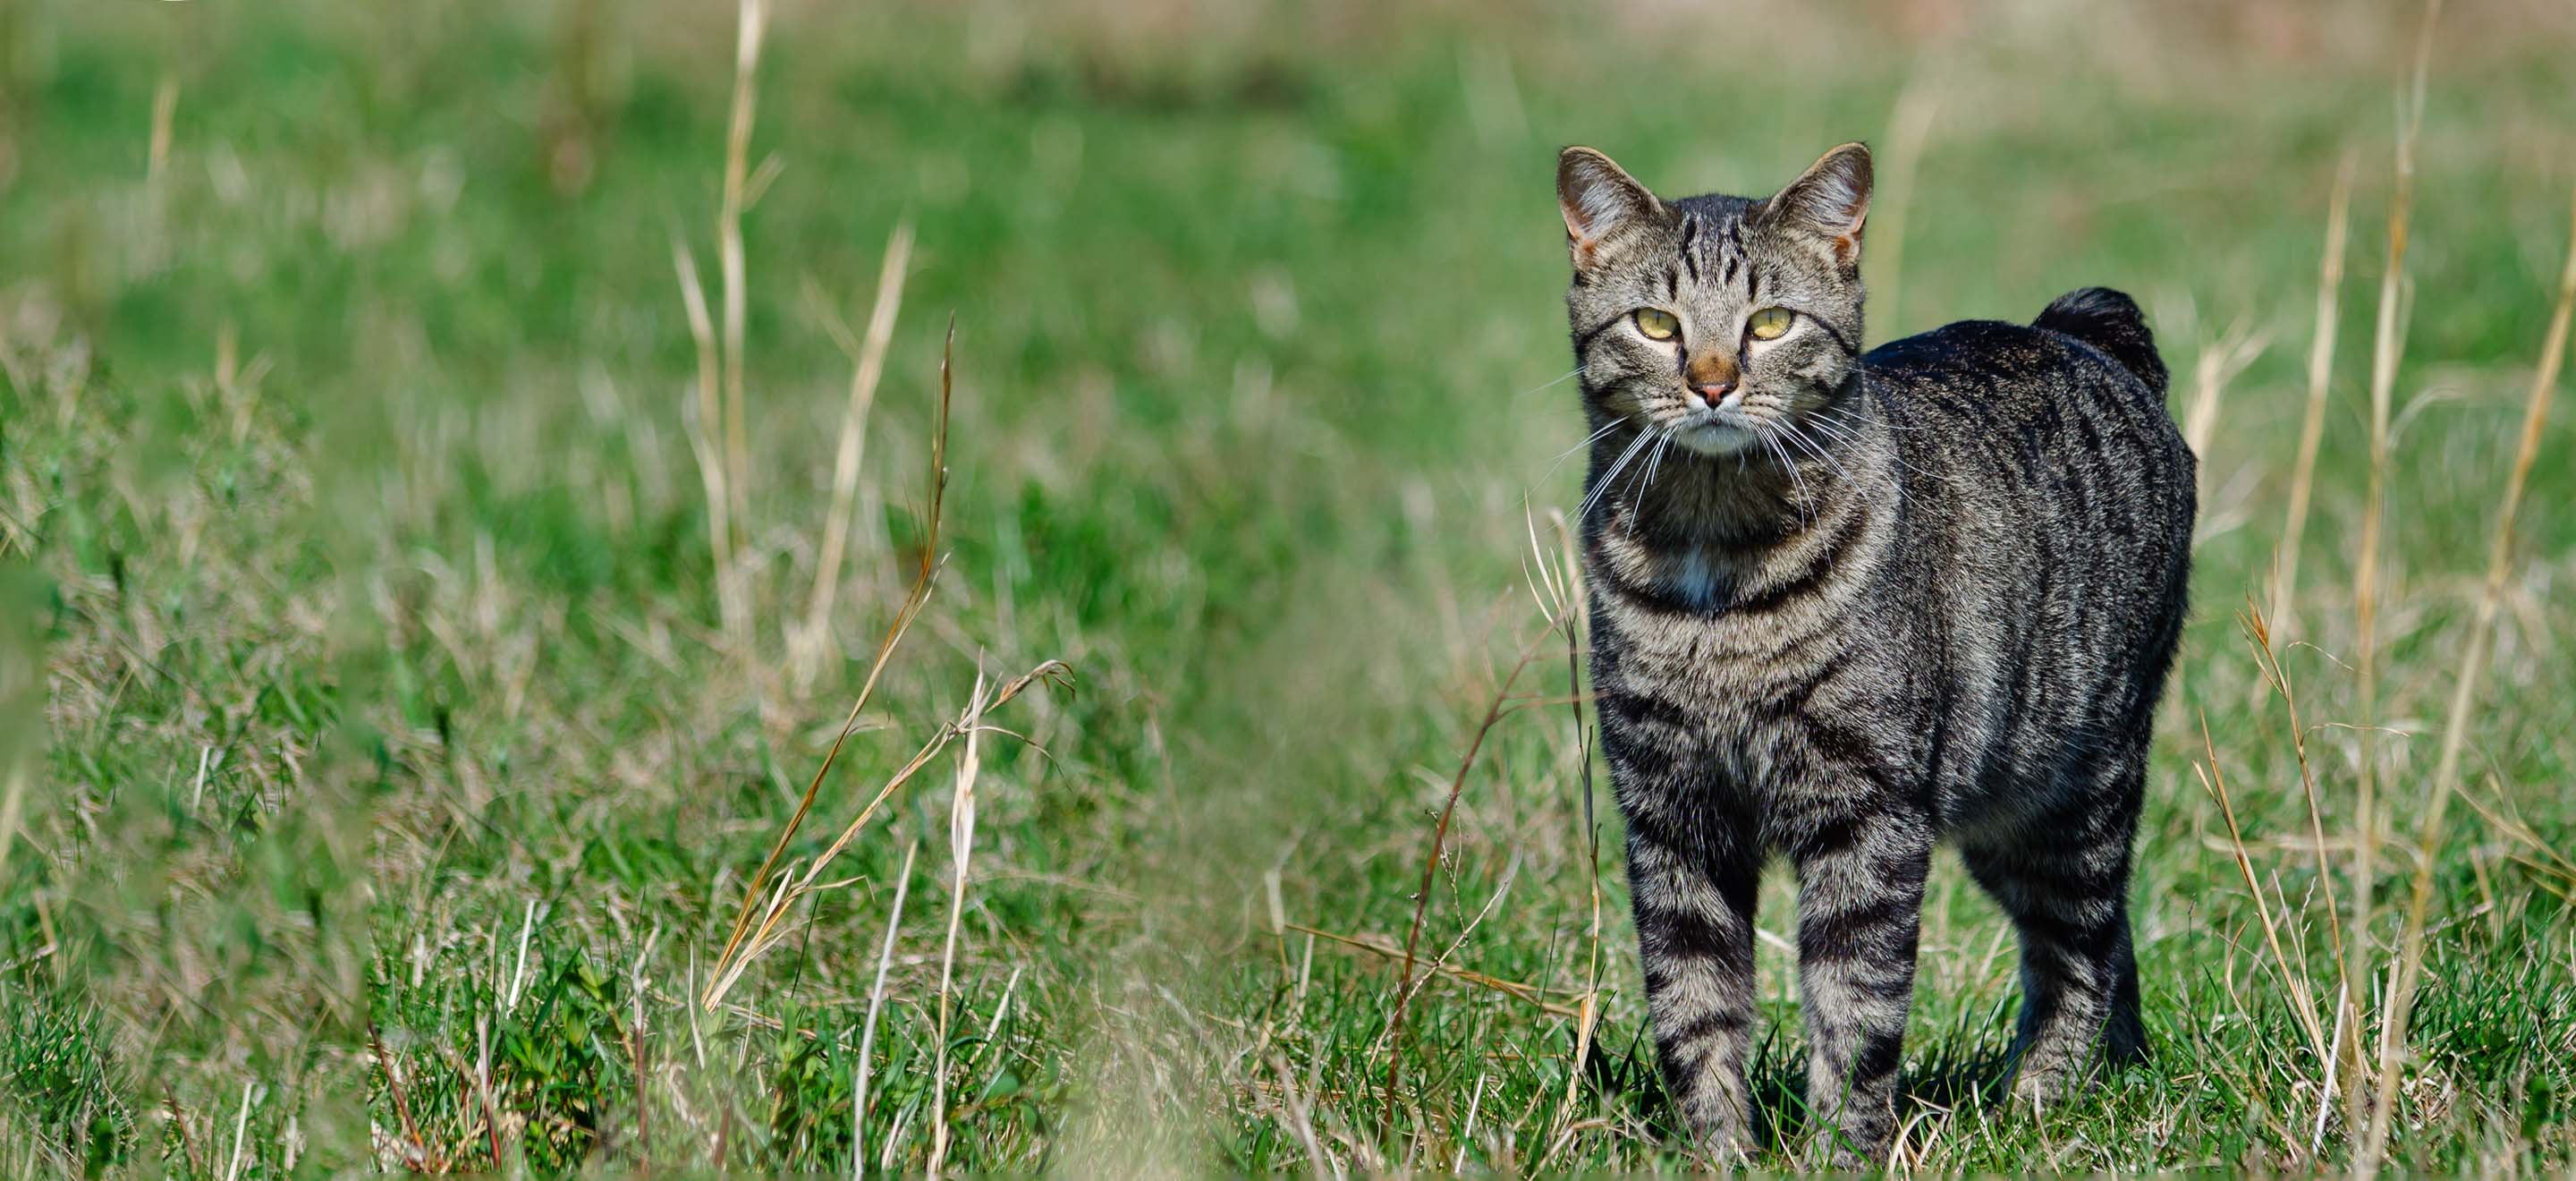 Striped Manx cat standing in a grassy field image